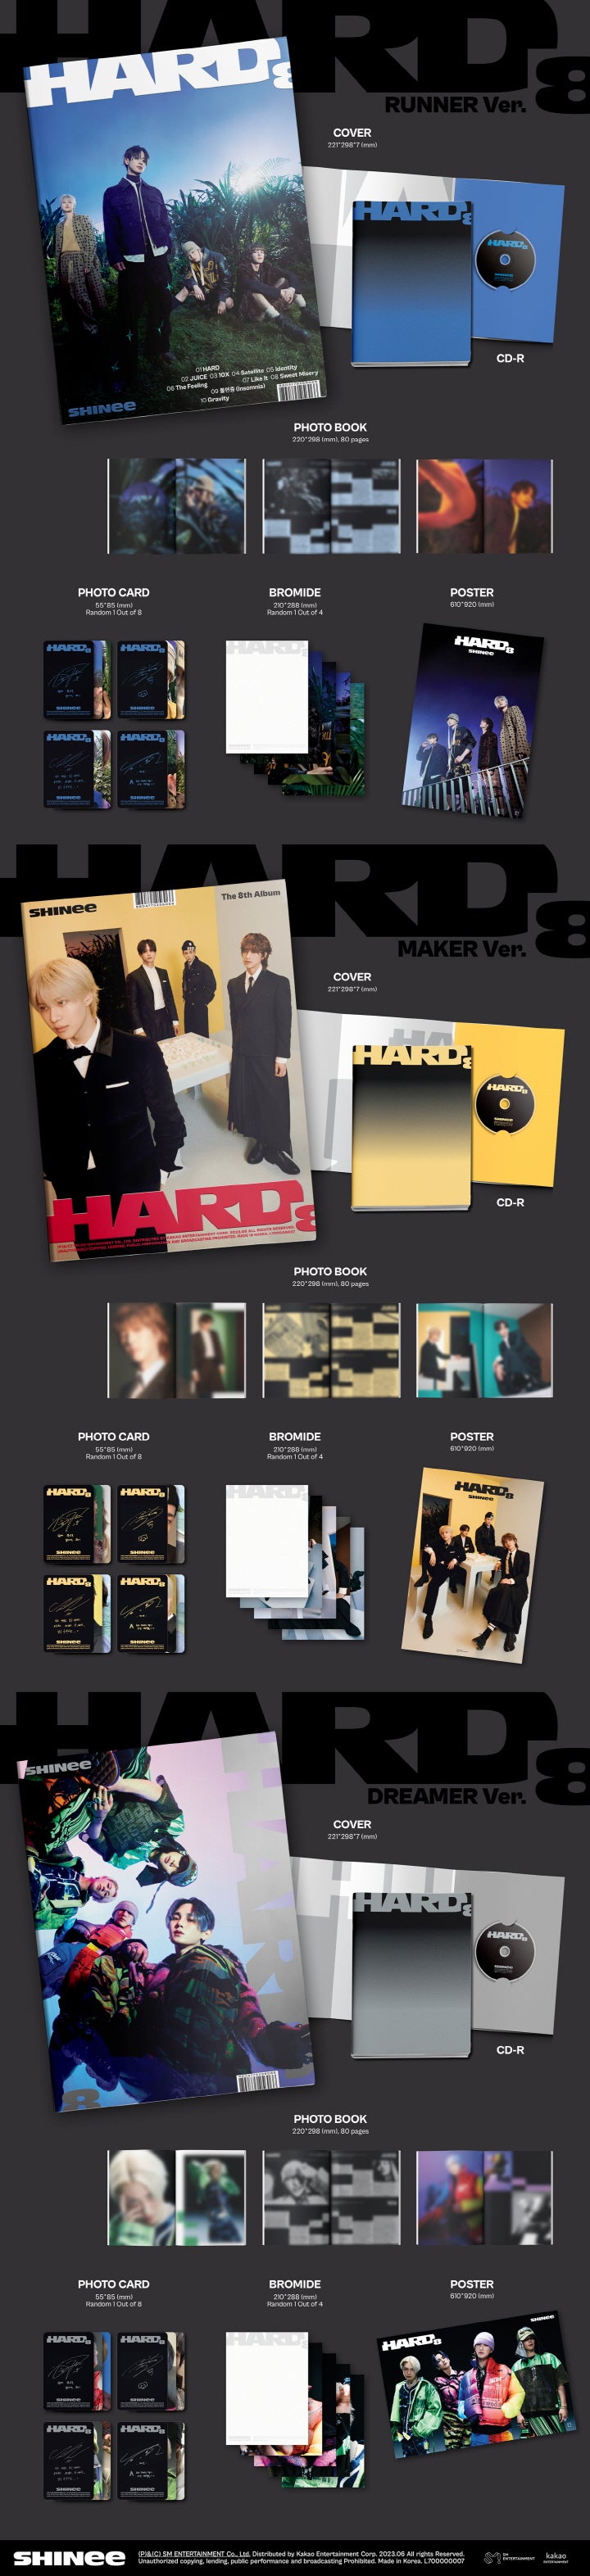 1 CD
1 Photo Book (80 pages)
1 Photo Card (random out of 8 types)
1 Bromide (random out of 4 types)